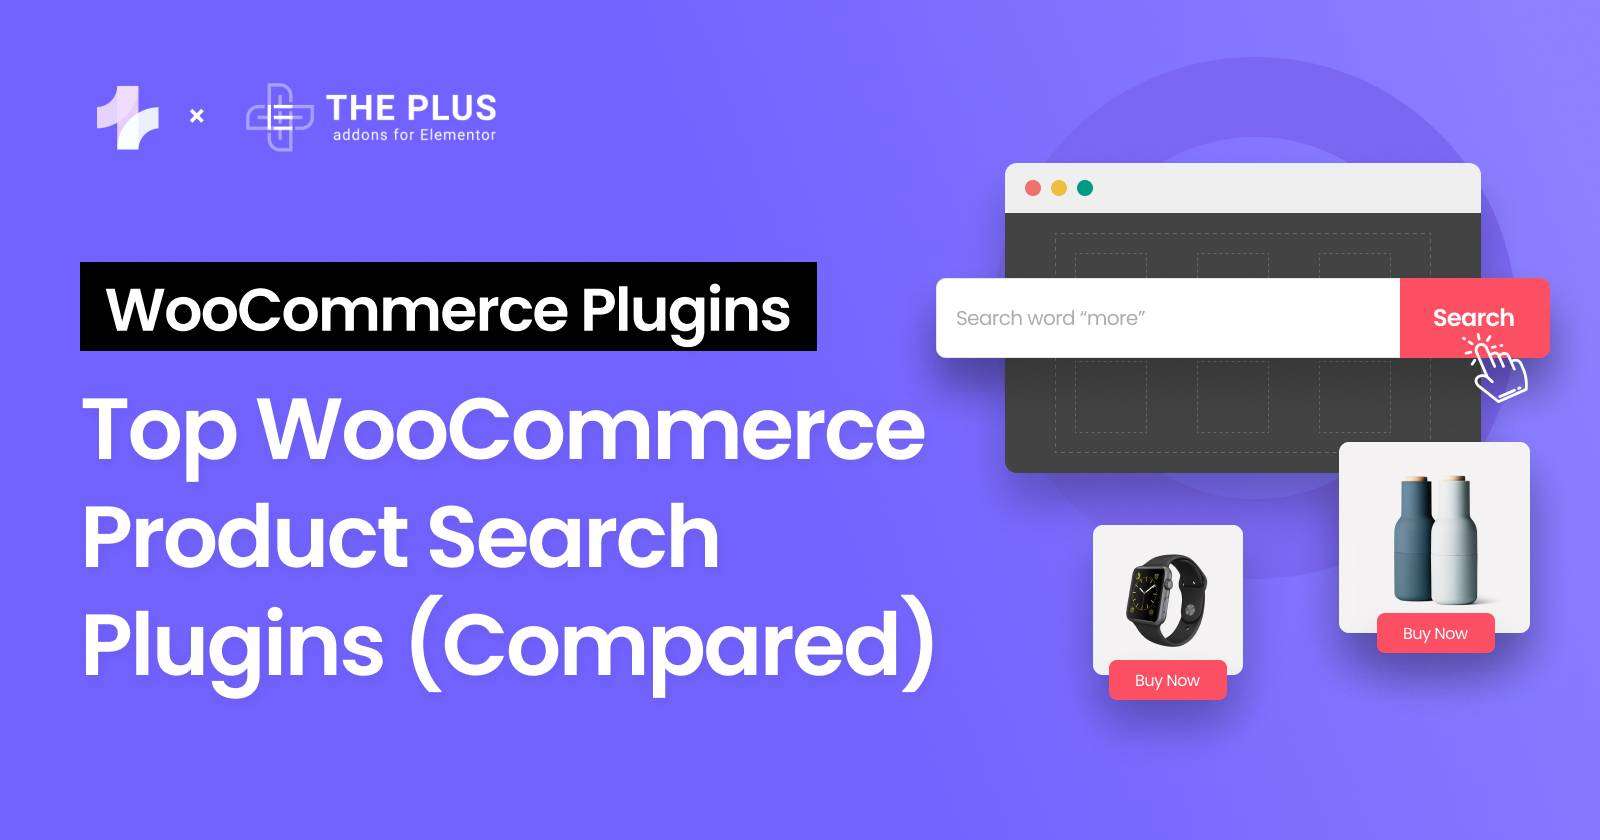 Top WooCommerce Product Search Plugins Compared The Plus Addons for Elementor